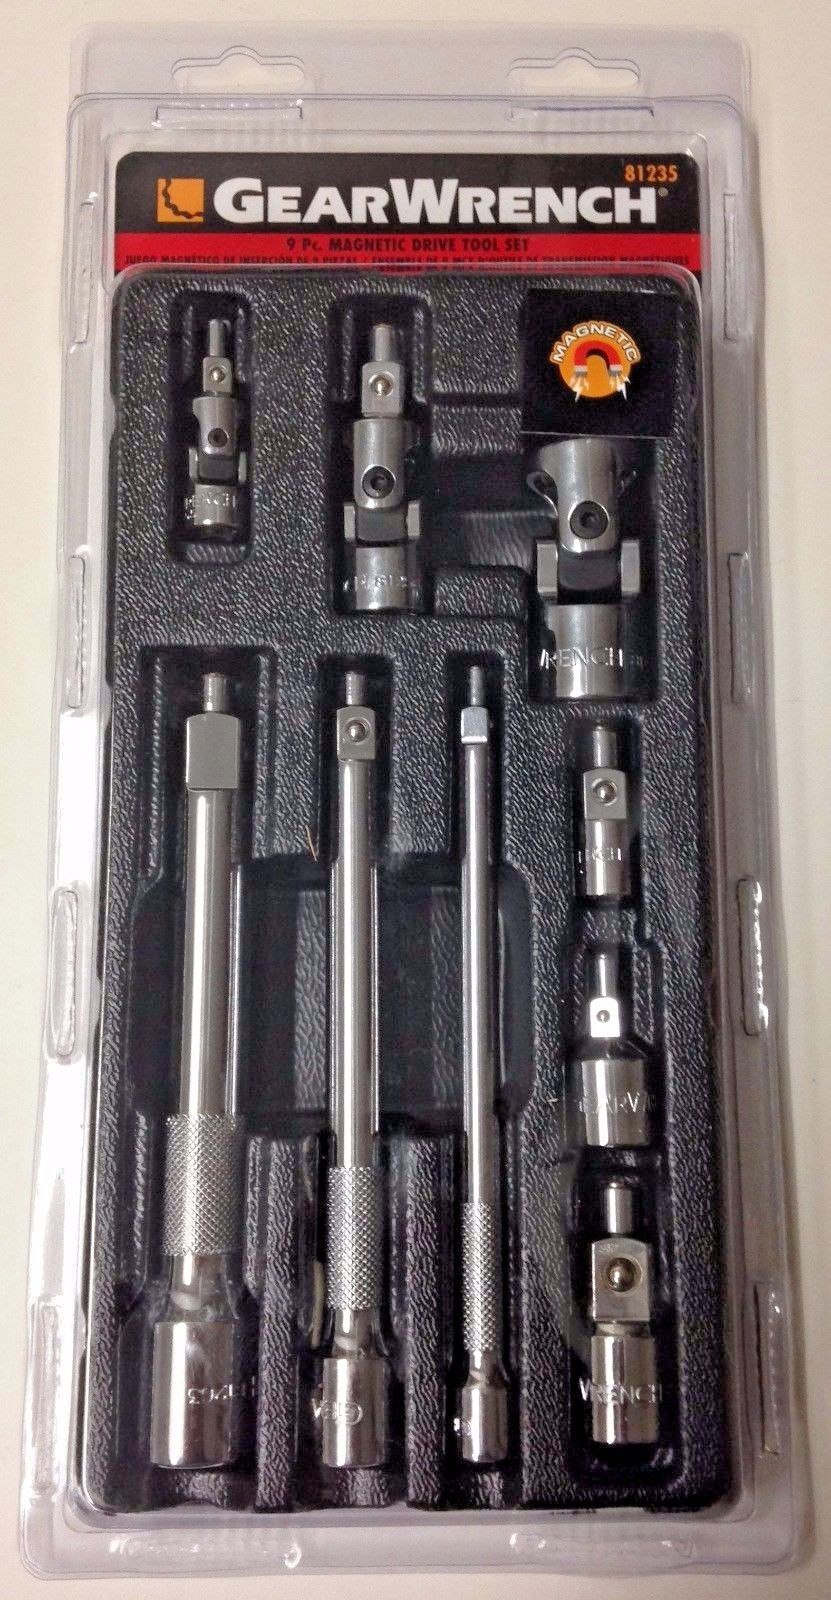 Gearwrench 81235 9 Piece Magnetic Drive Tool Set